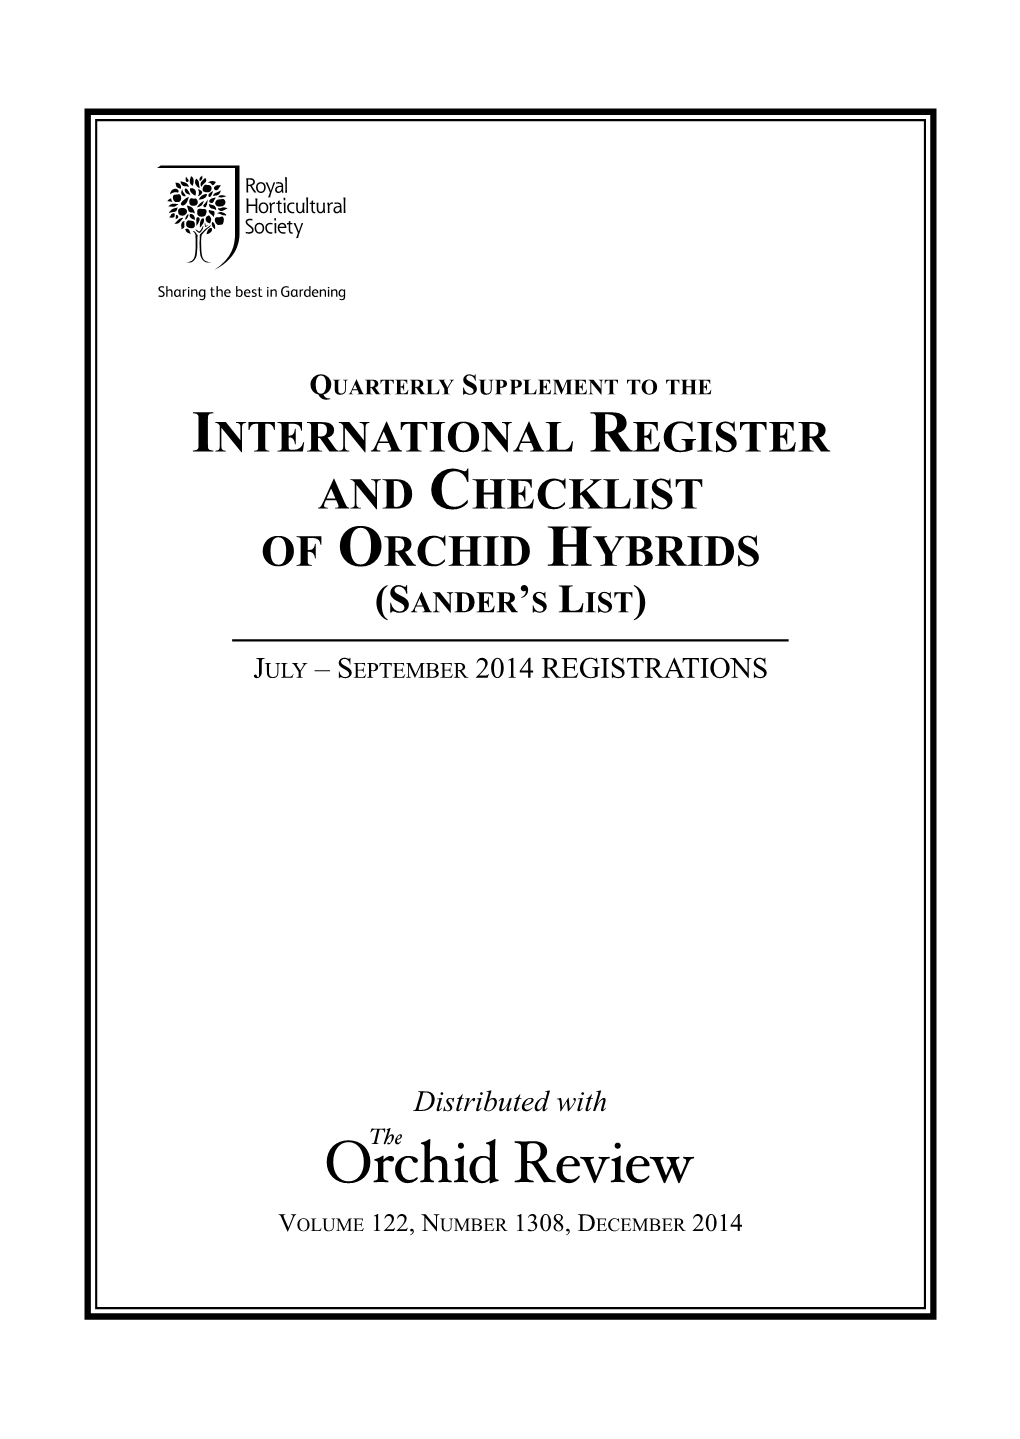 RHS Website, As Are the Quarterly Supplements of New Orchid Hybrids; Visit